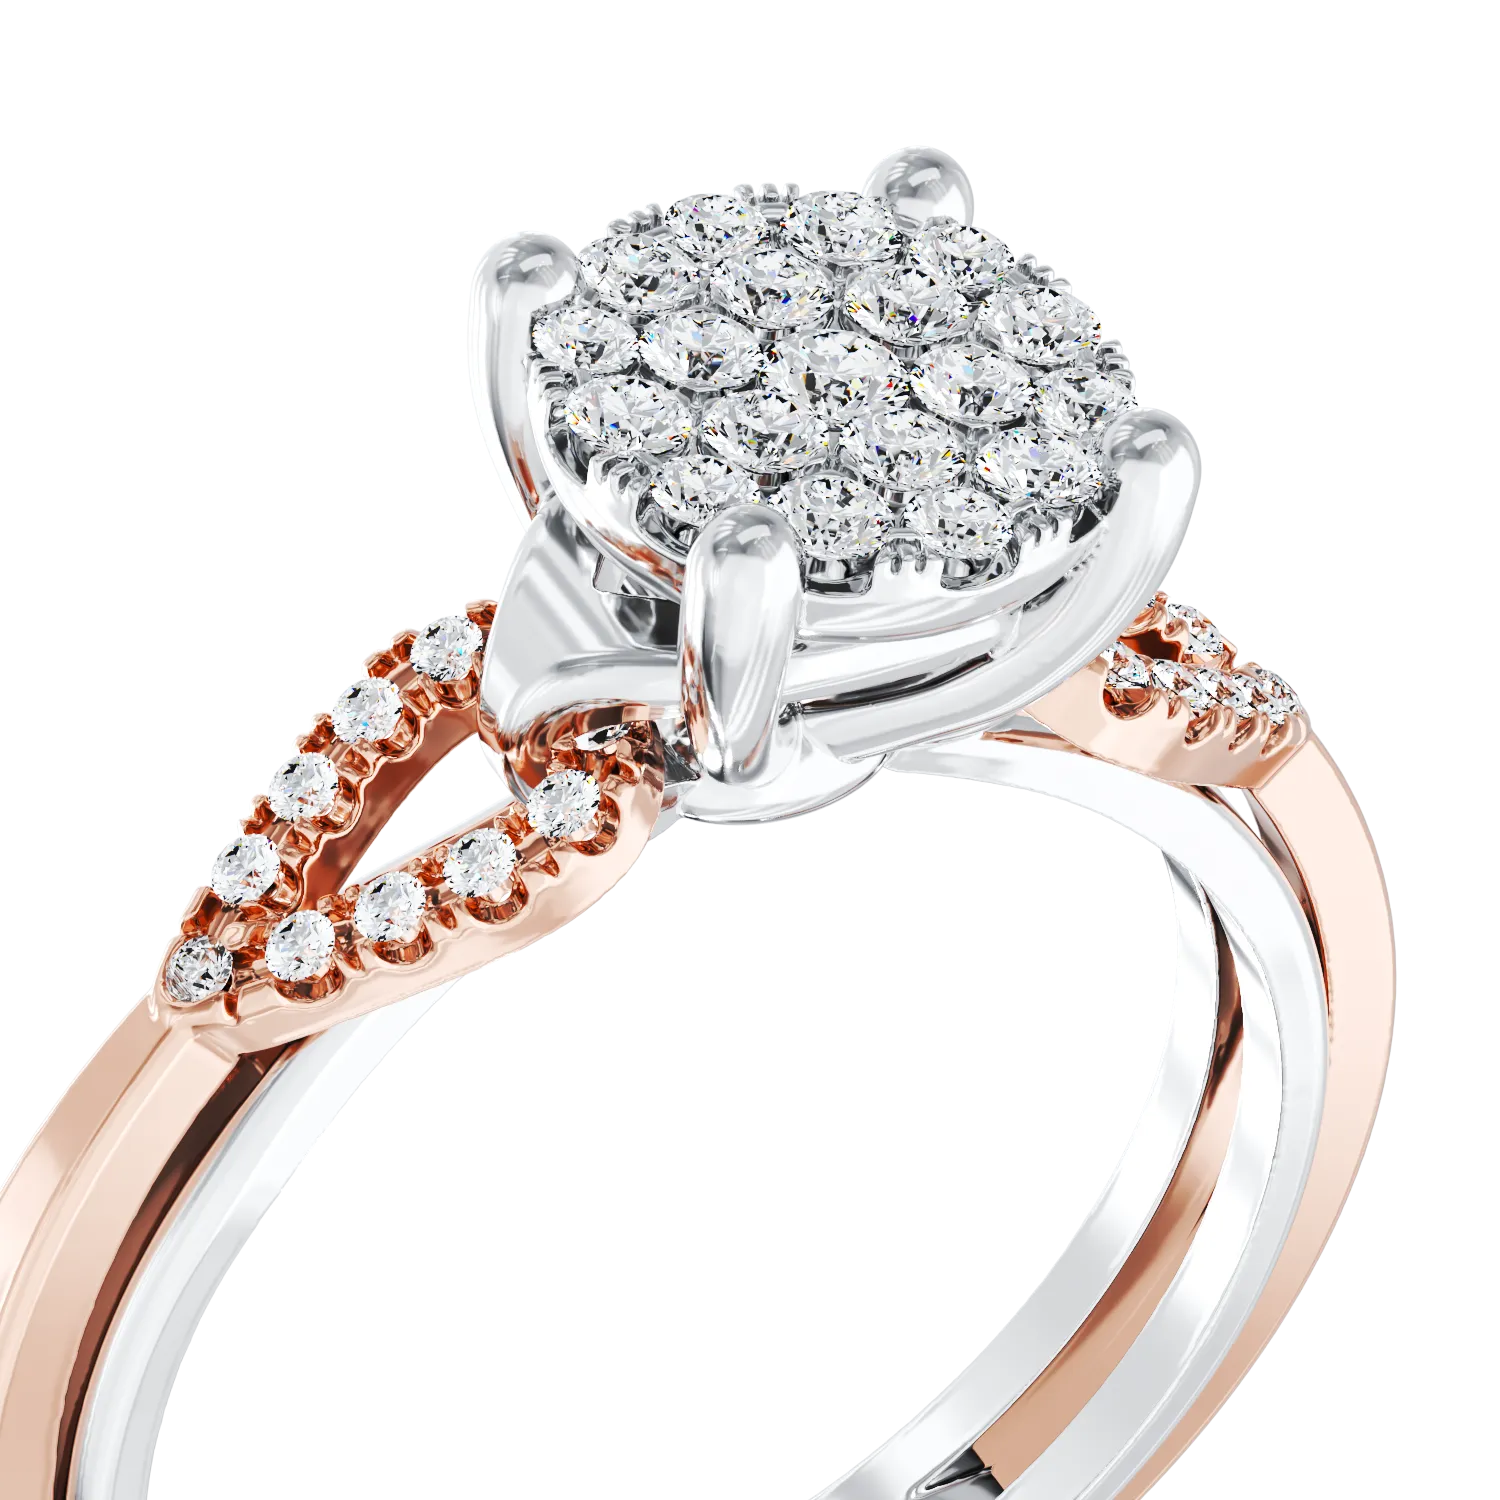 18K white-rose gold engagement ring with 0.33ct diamonds